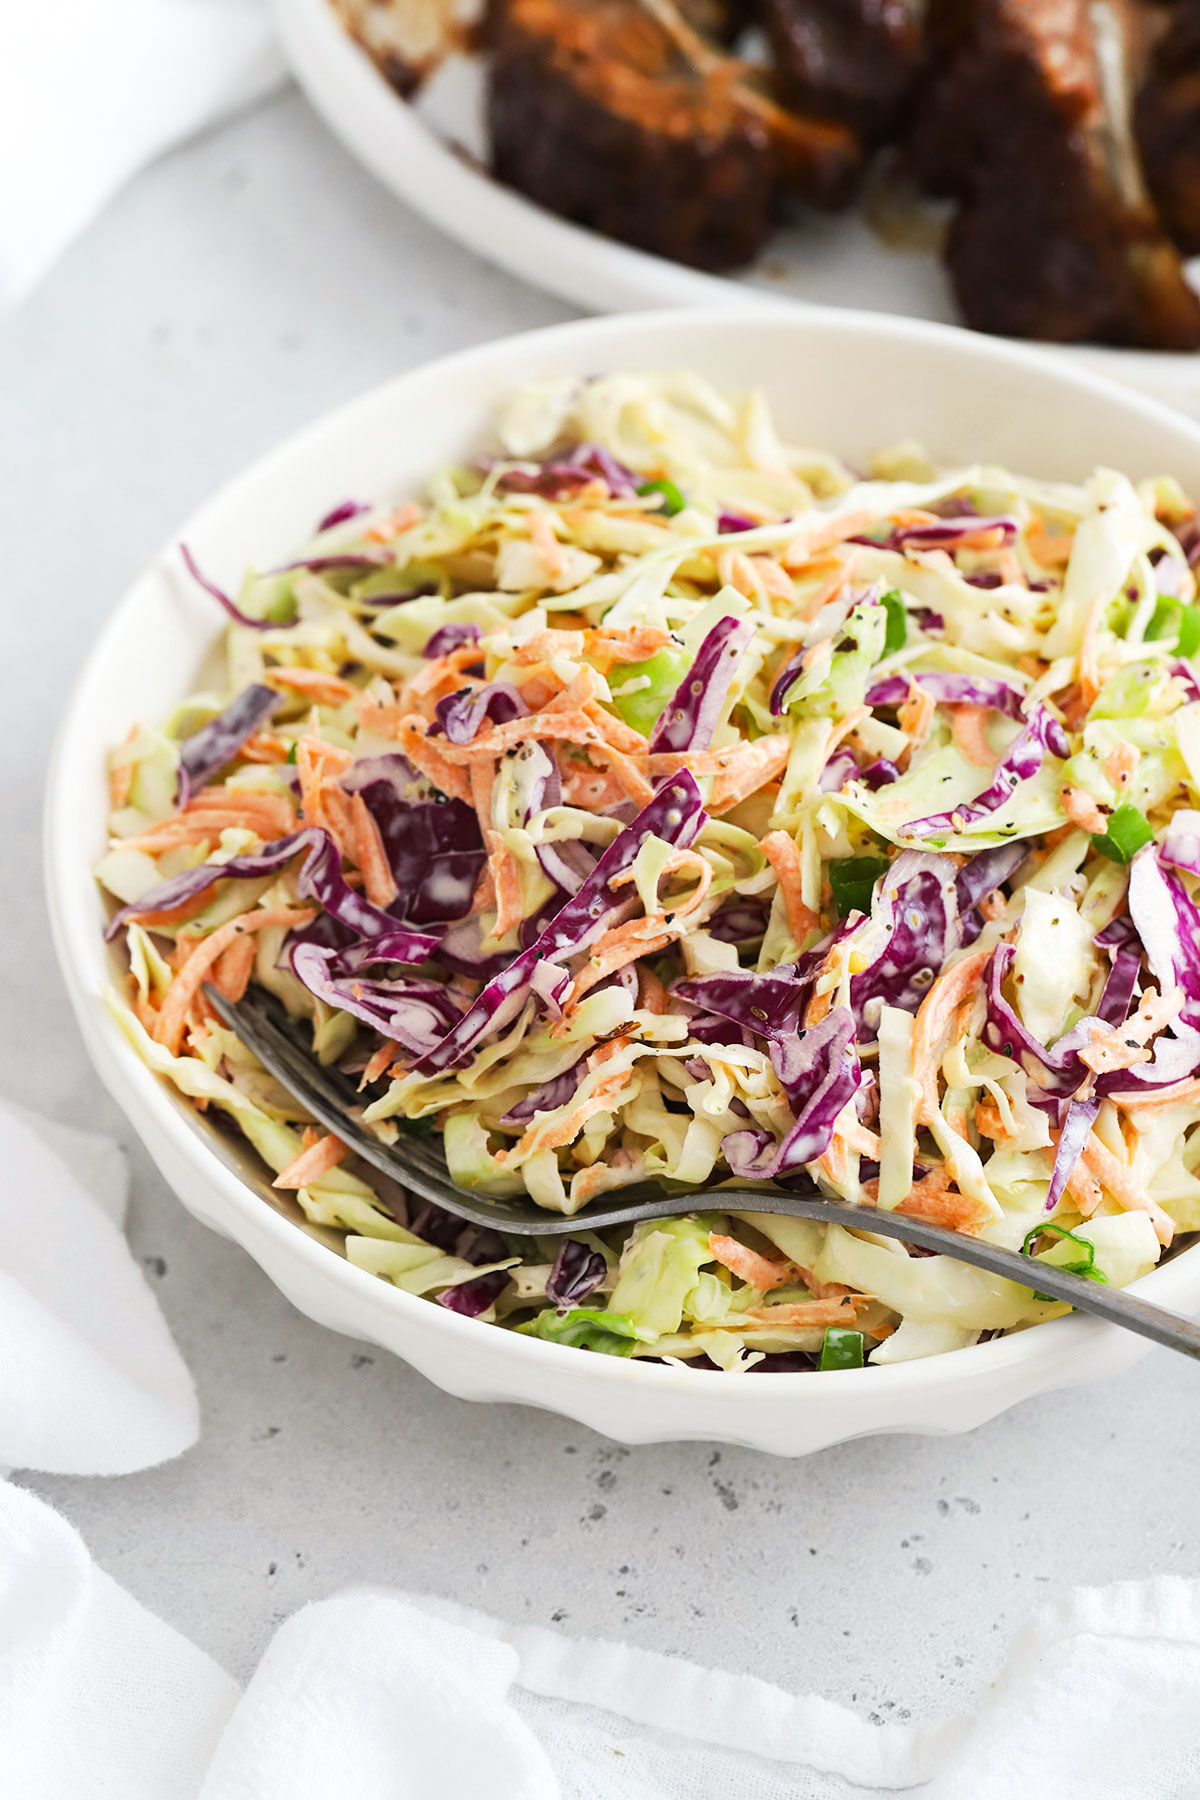 gluten-free coleslaw in a white bowl with creamy dressing